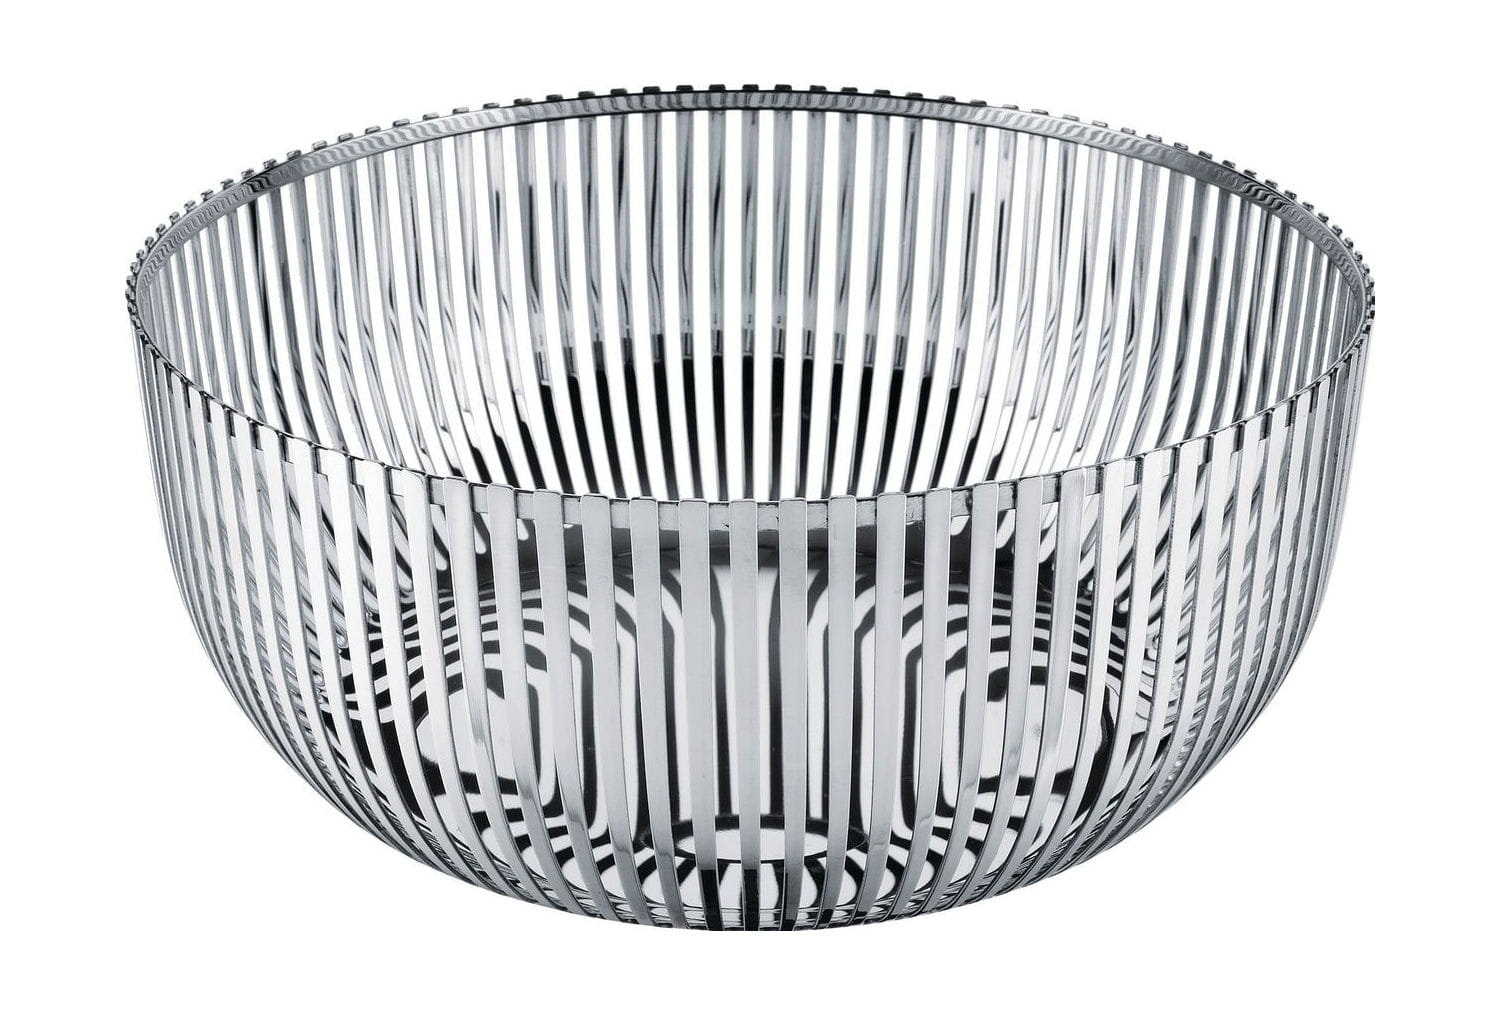 Alessi Pch05 Fruit Bowl Made Of Stainless Steel, ø24 Cm